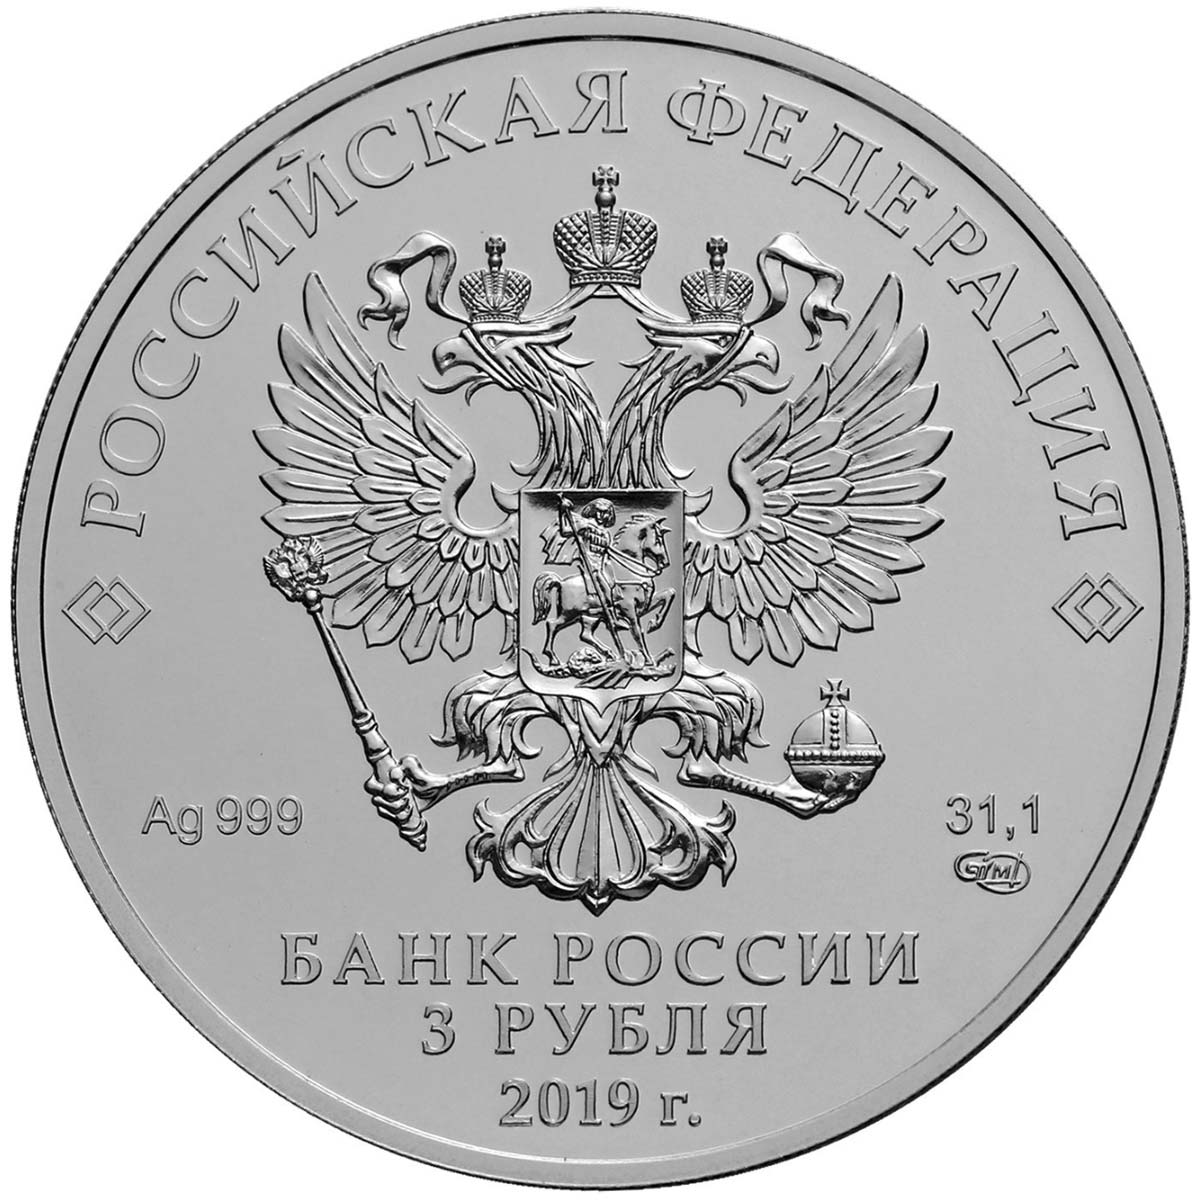 ST GEORGE FABULOUS 15 SILVER COLLECTION RUSSIA 2016 3 RUBLES 1 OZ SILVER COIN